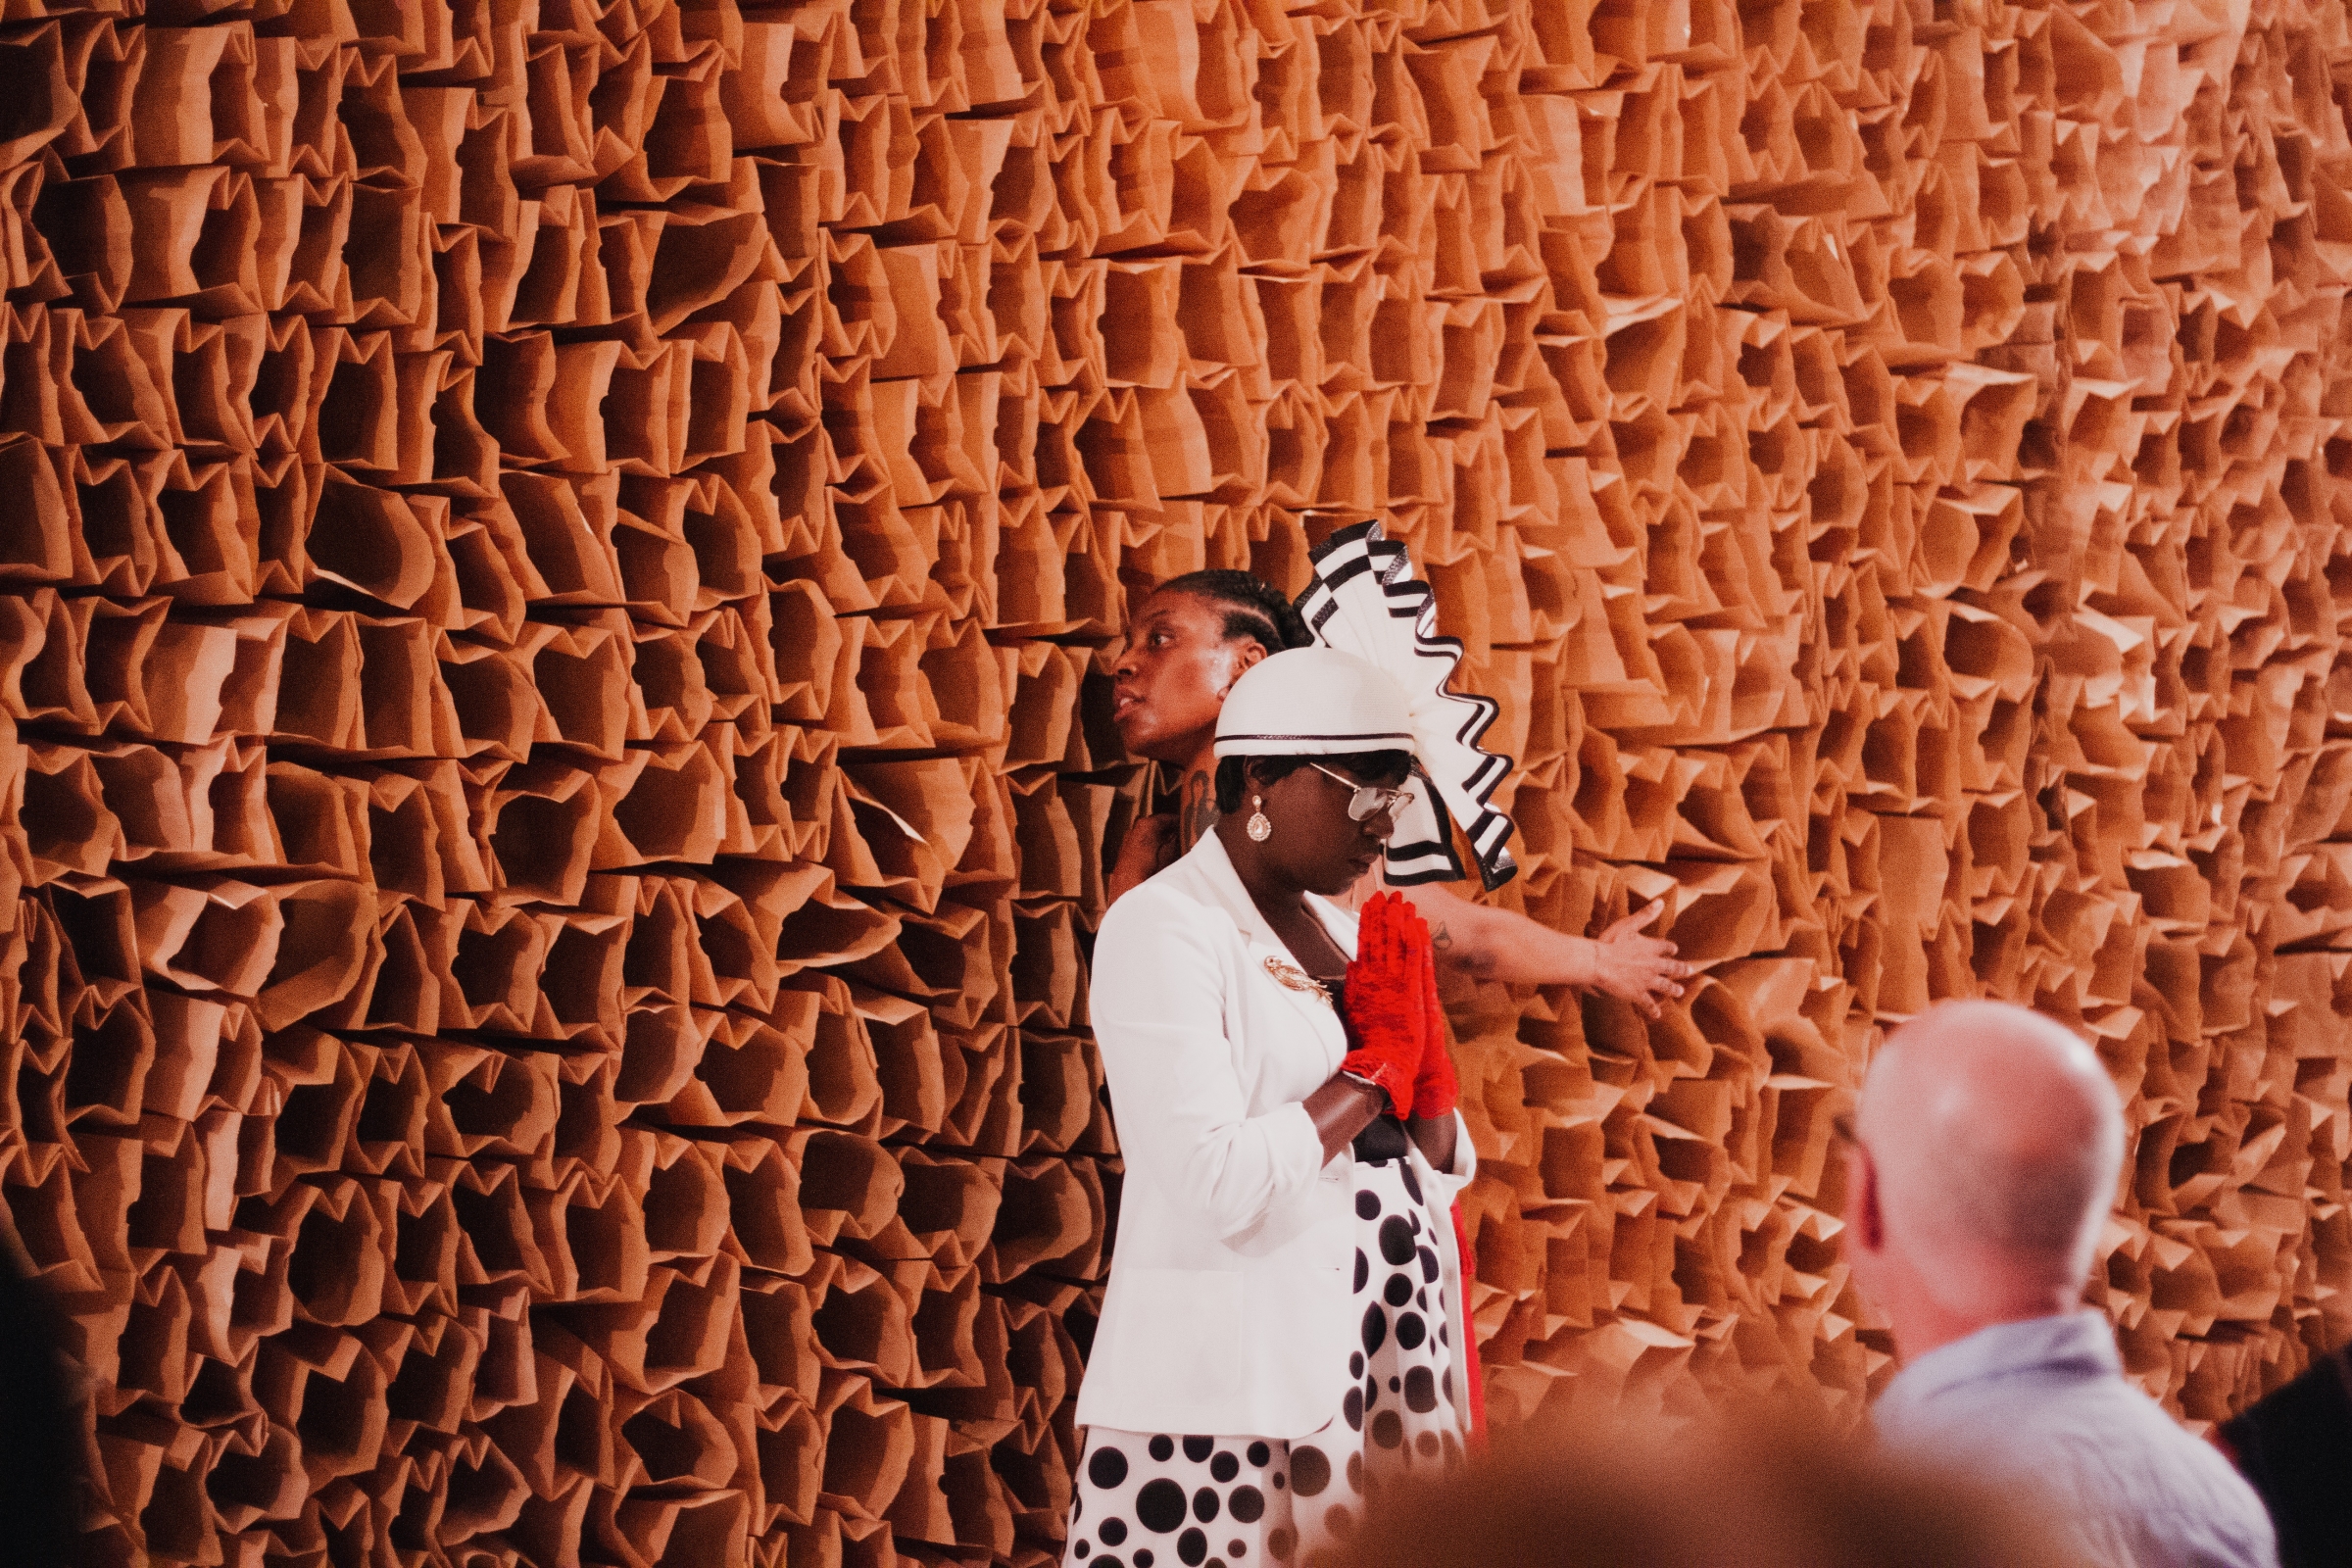 A photo of Shimmy LaRoux, a member of the usher board for The People's Church, standing in front of a brown wall covered in paper bags and an audience, wearing all white with red gloves and palms together in front of her in prayer. Photo by Candice Majors.